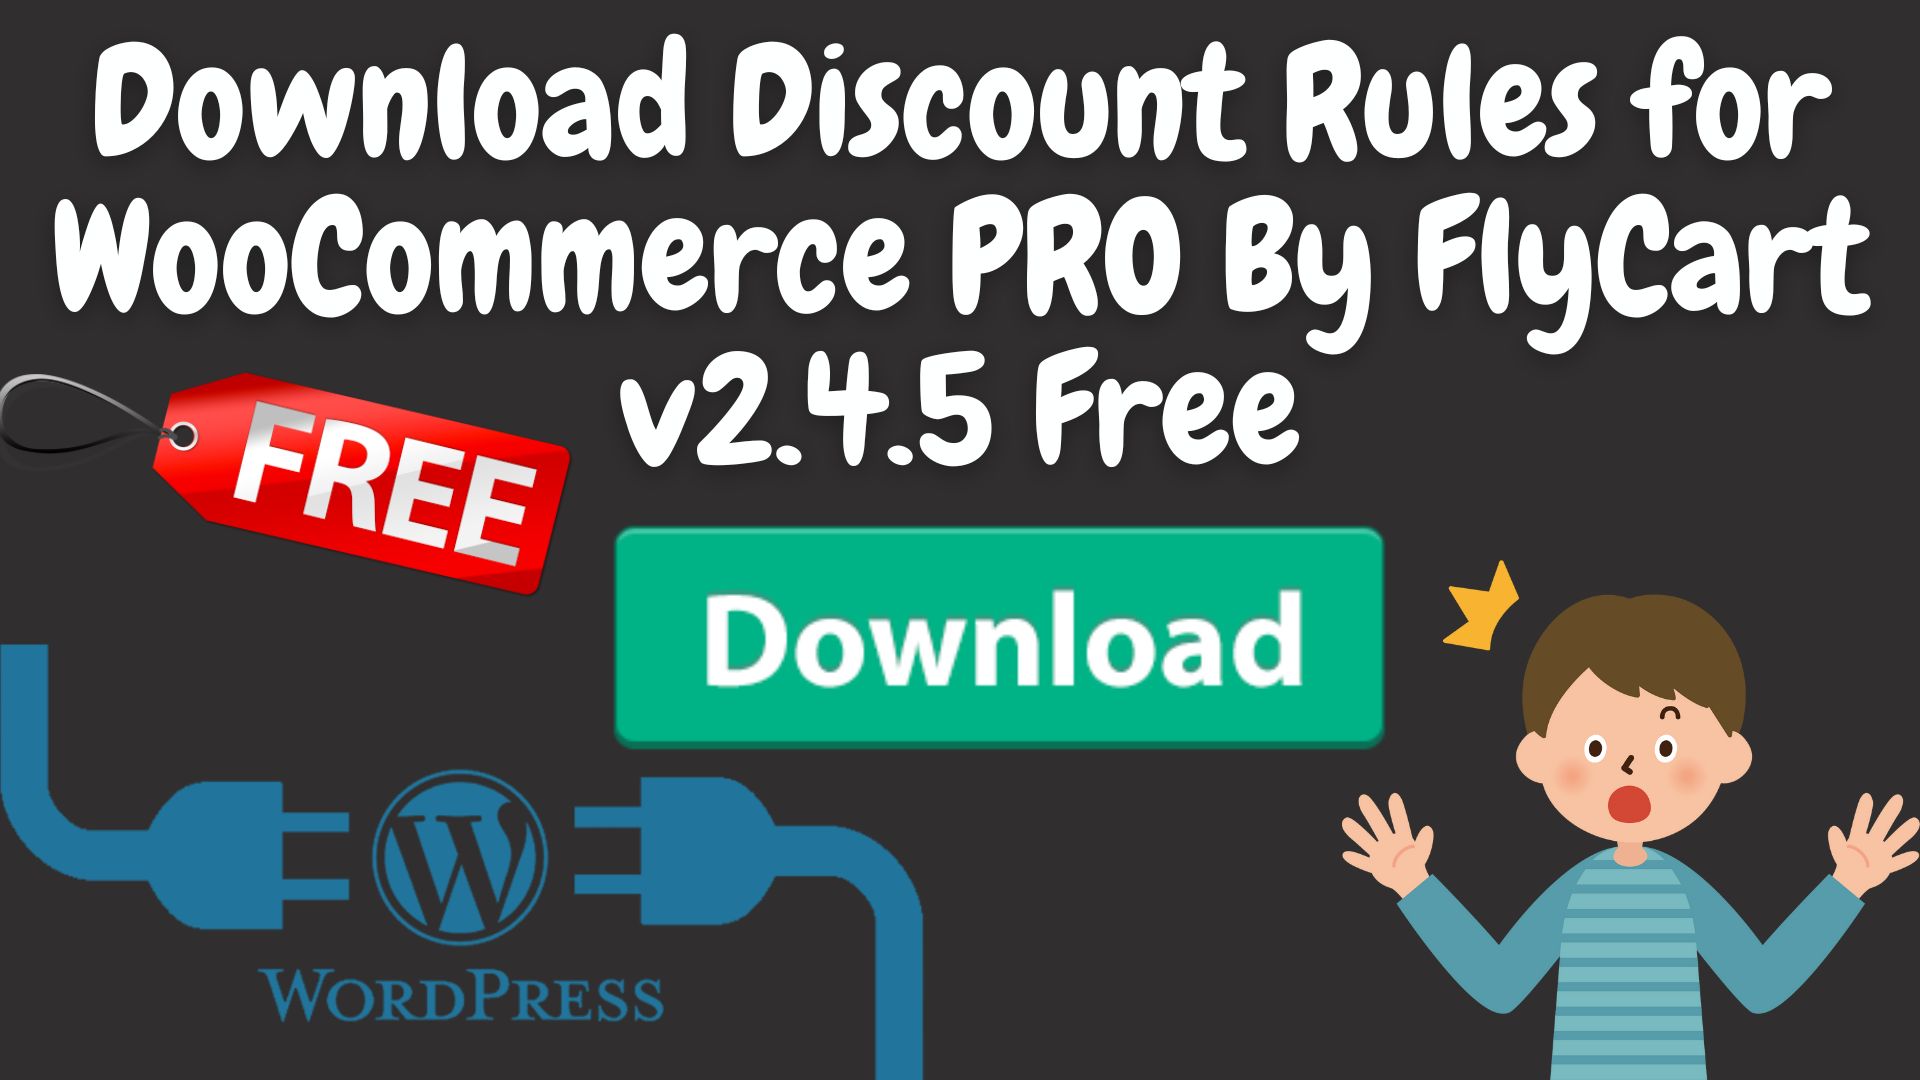 Download discount rules for woocommerce pro by flycart v2. 4. 5 free